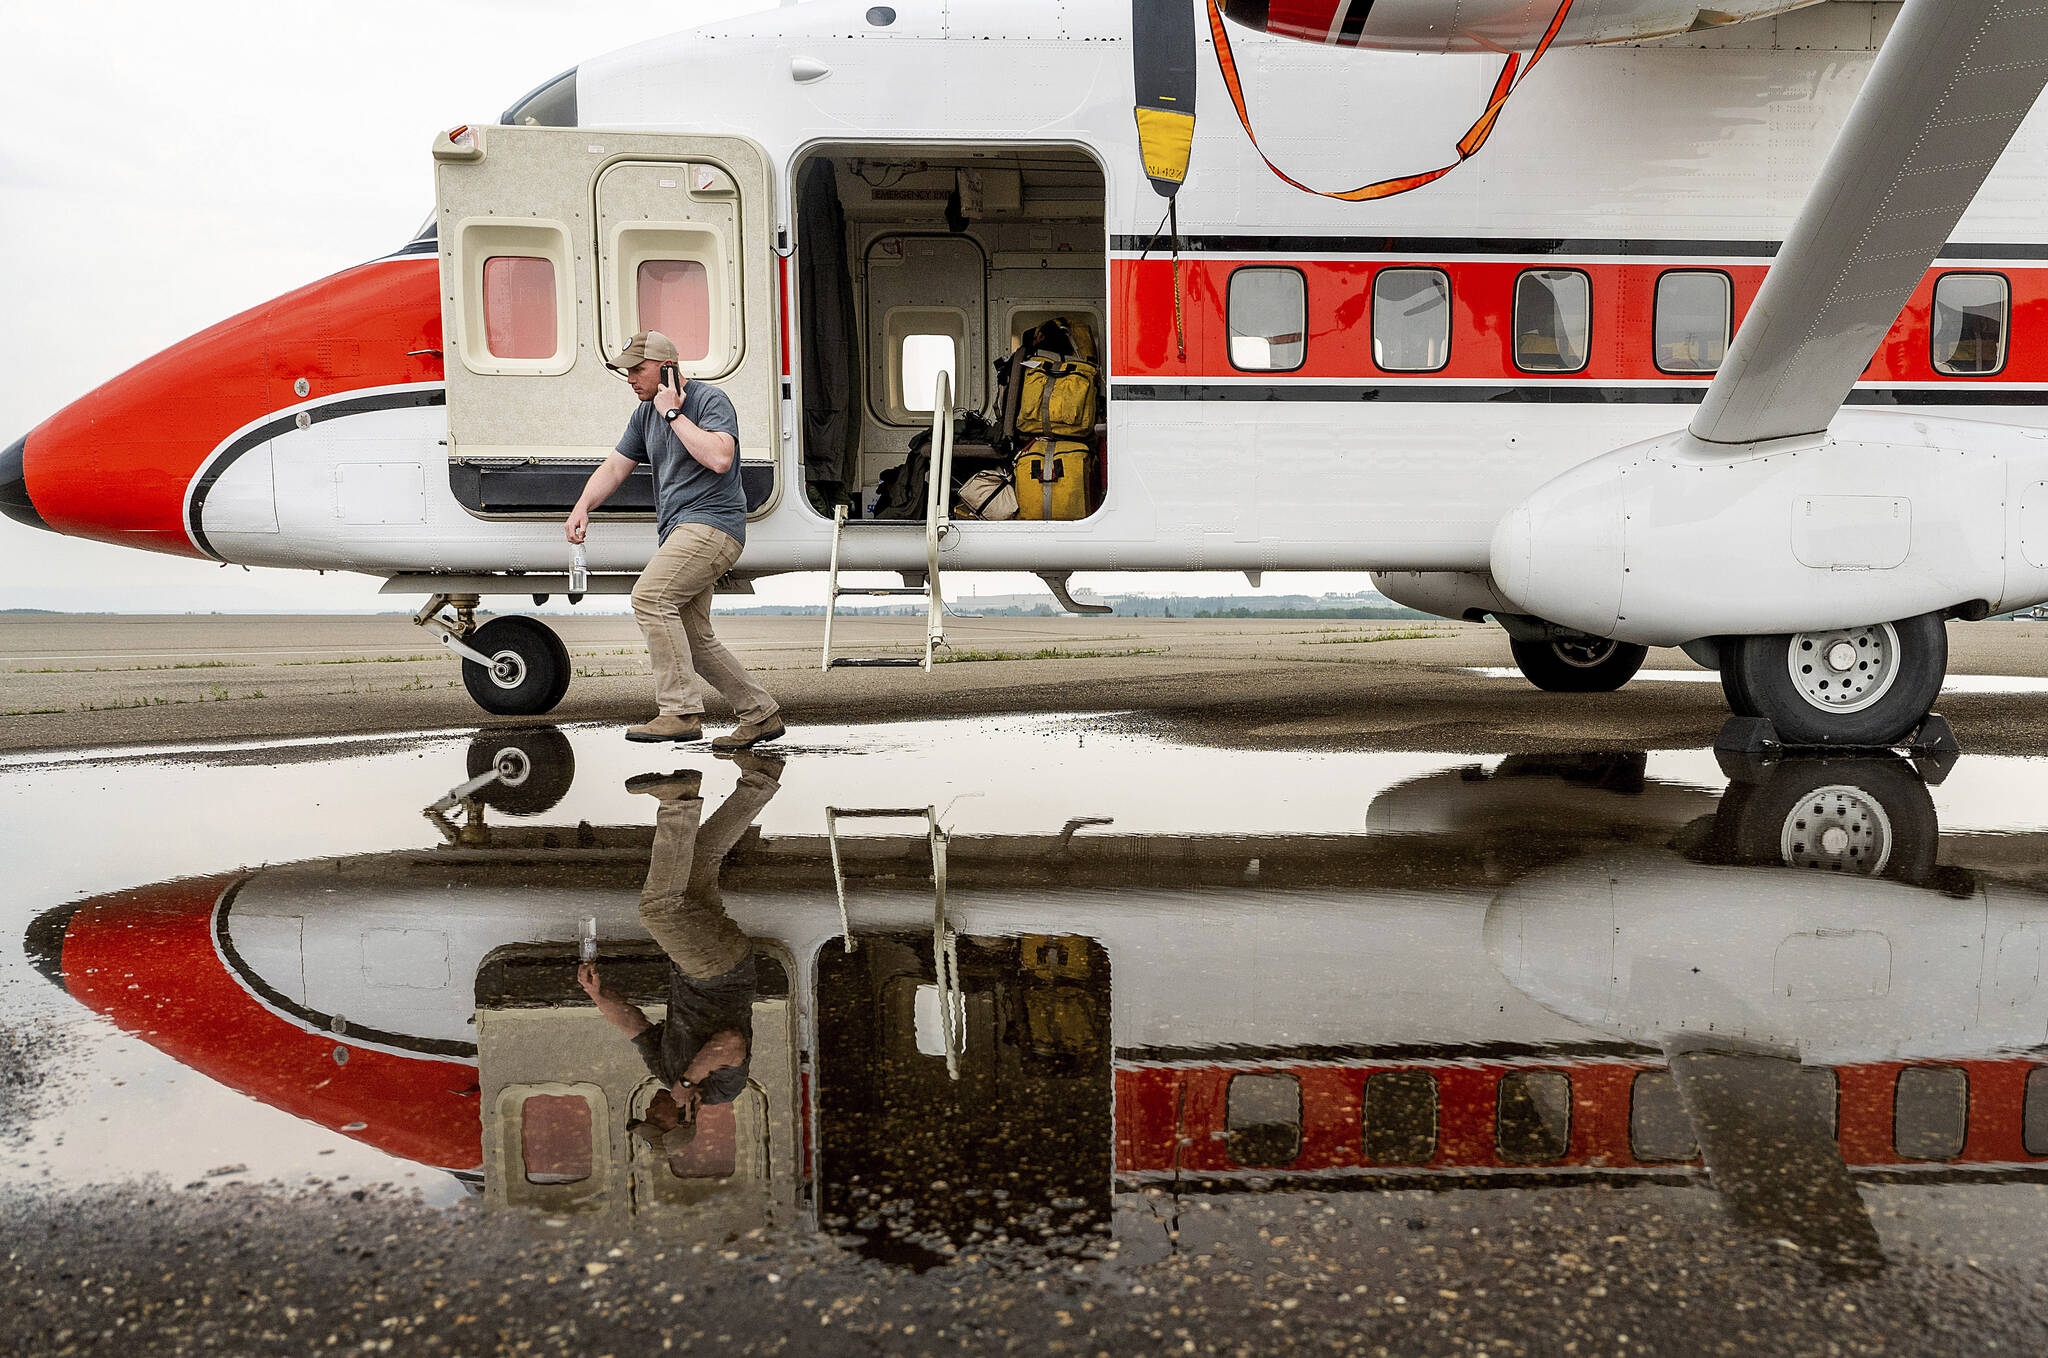 U.S. Forest Service co-pilot Matt Berggren steps through a puddle while exiting a plane in Fort St. John, British Columbia, Wednesday, July 5, 2023. U.S. smokejumpers are assisting Canadian firefighters battling blazes throughout the region. (AP Photo/Noah Berger)